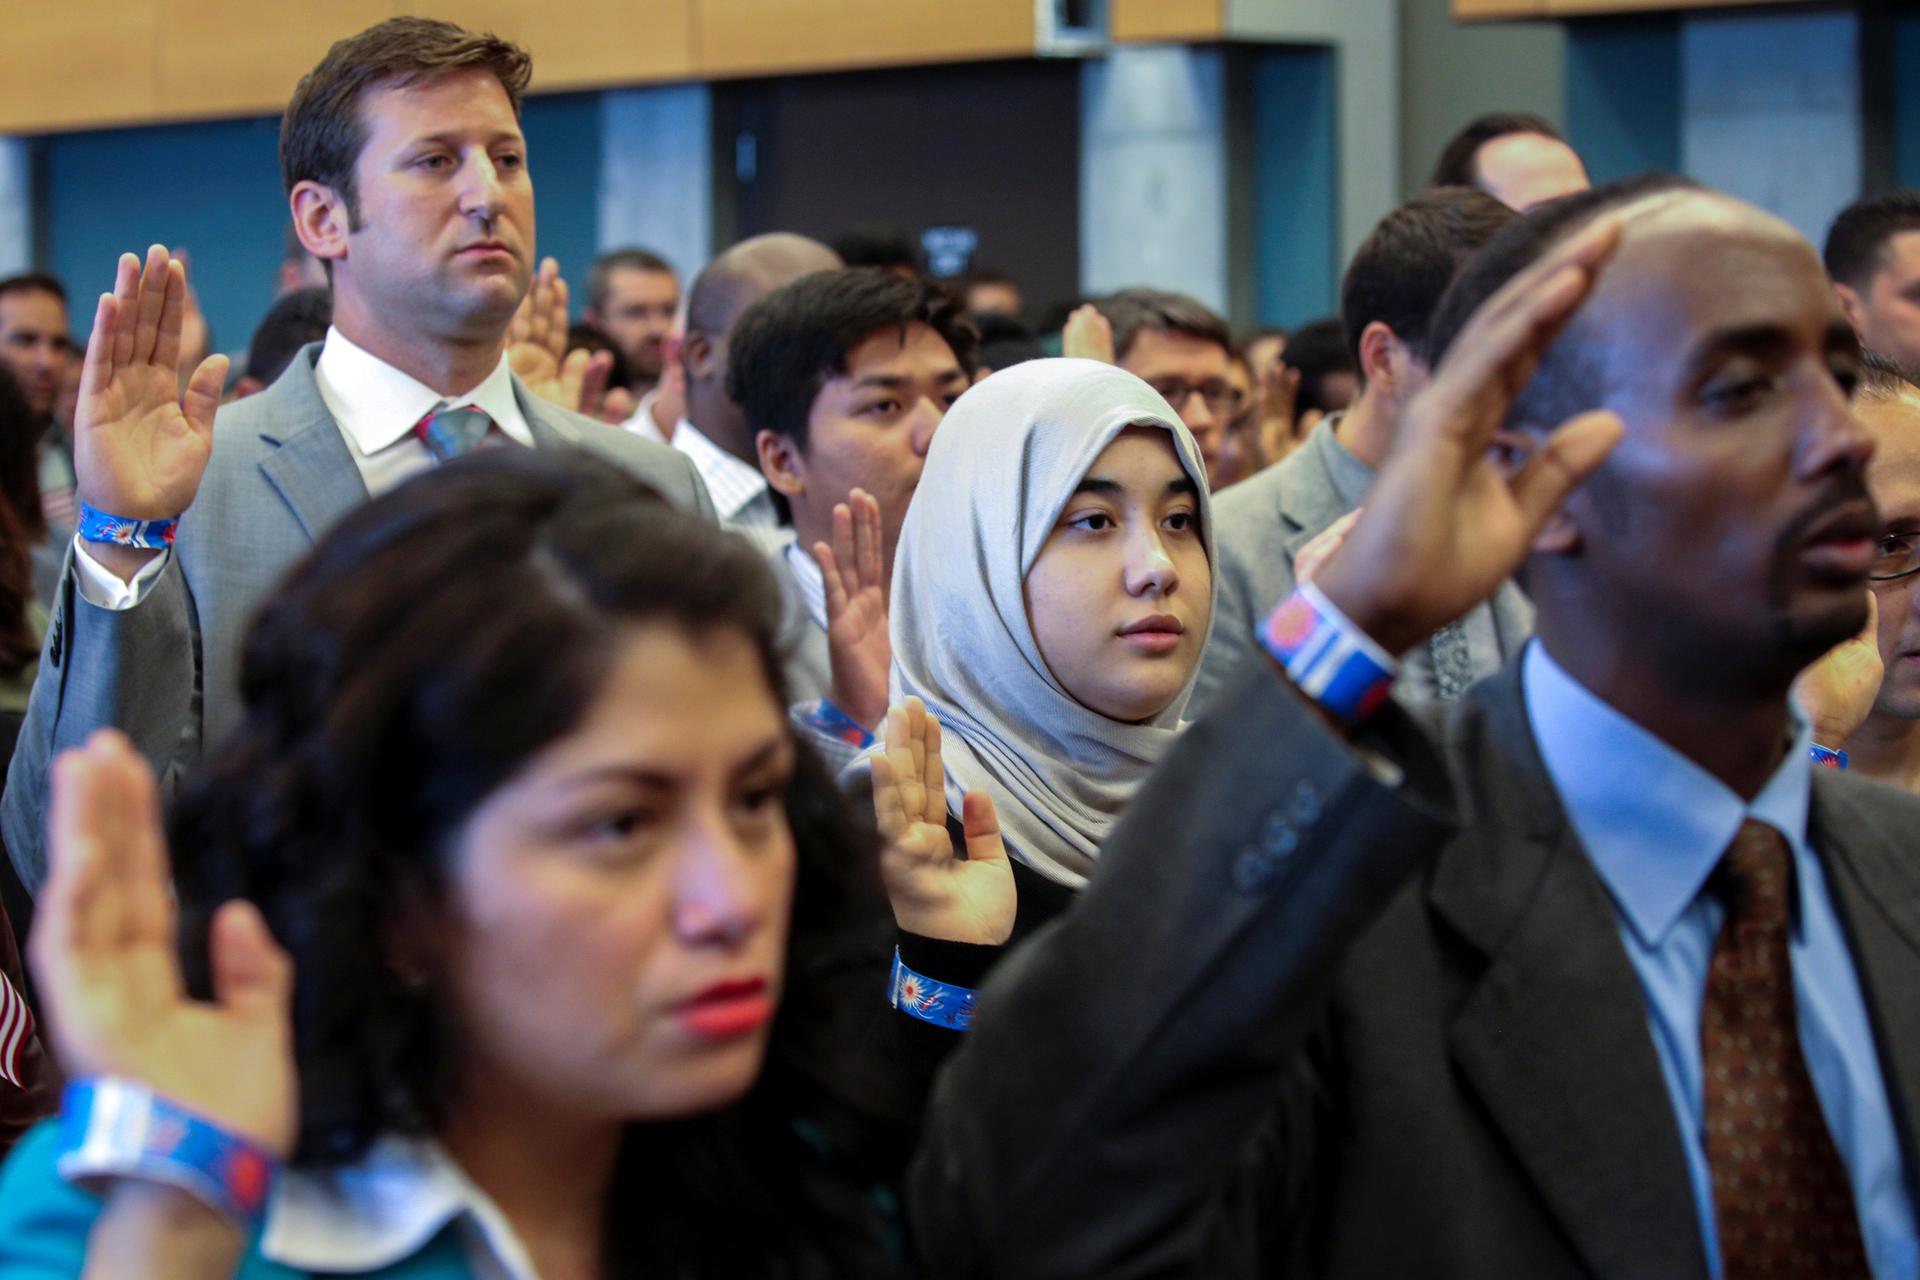 A Naturalization Ceremony in Seattle, Washington